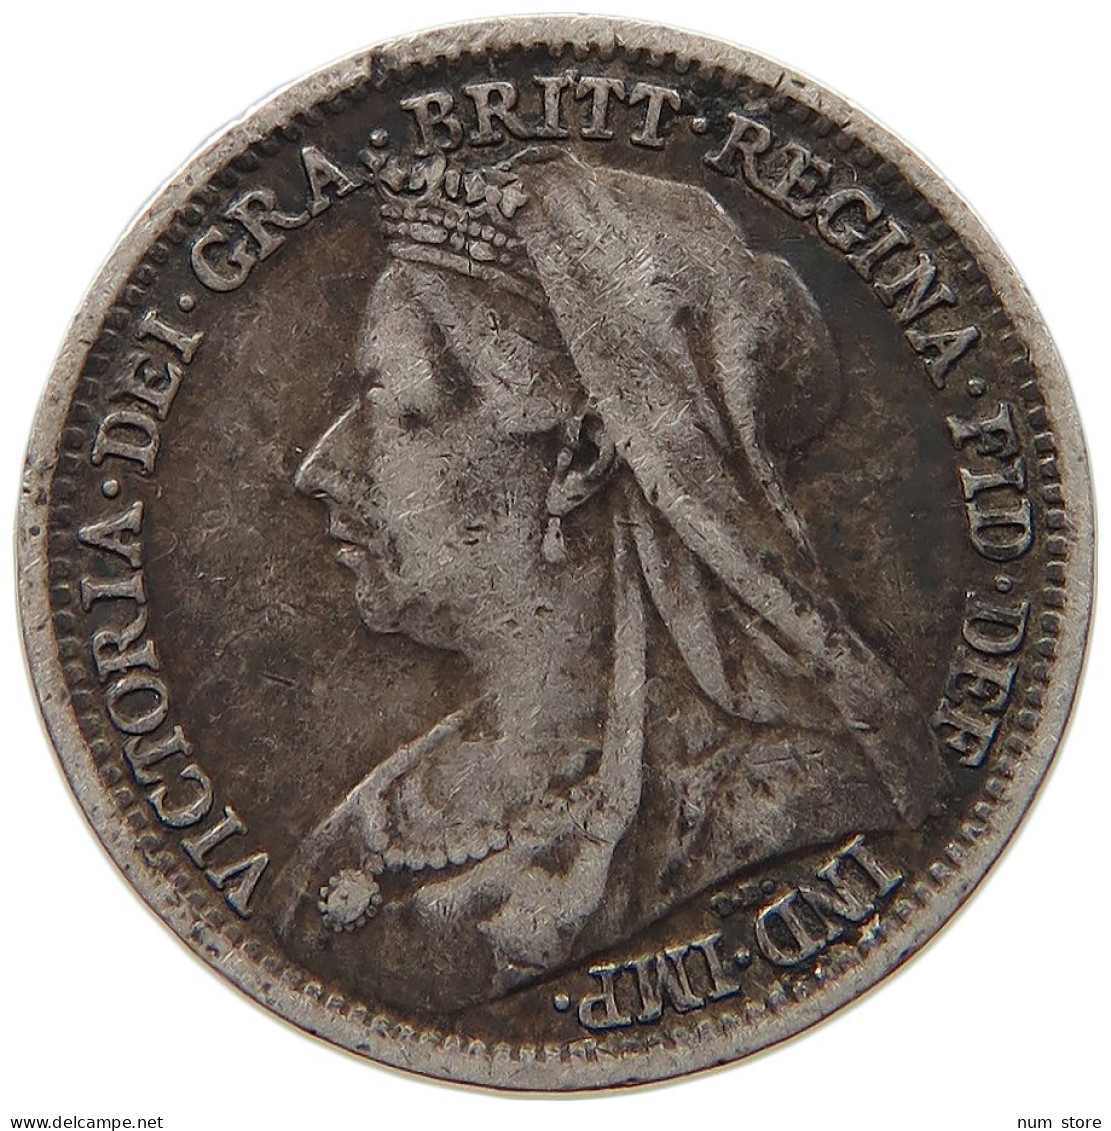 GREAT BRITAIN THREEPENCE 1898 Victoria 1837-1901 #s013 0227 - F. 3 Pence